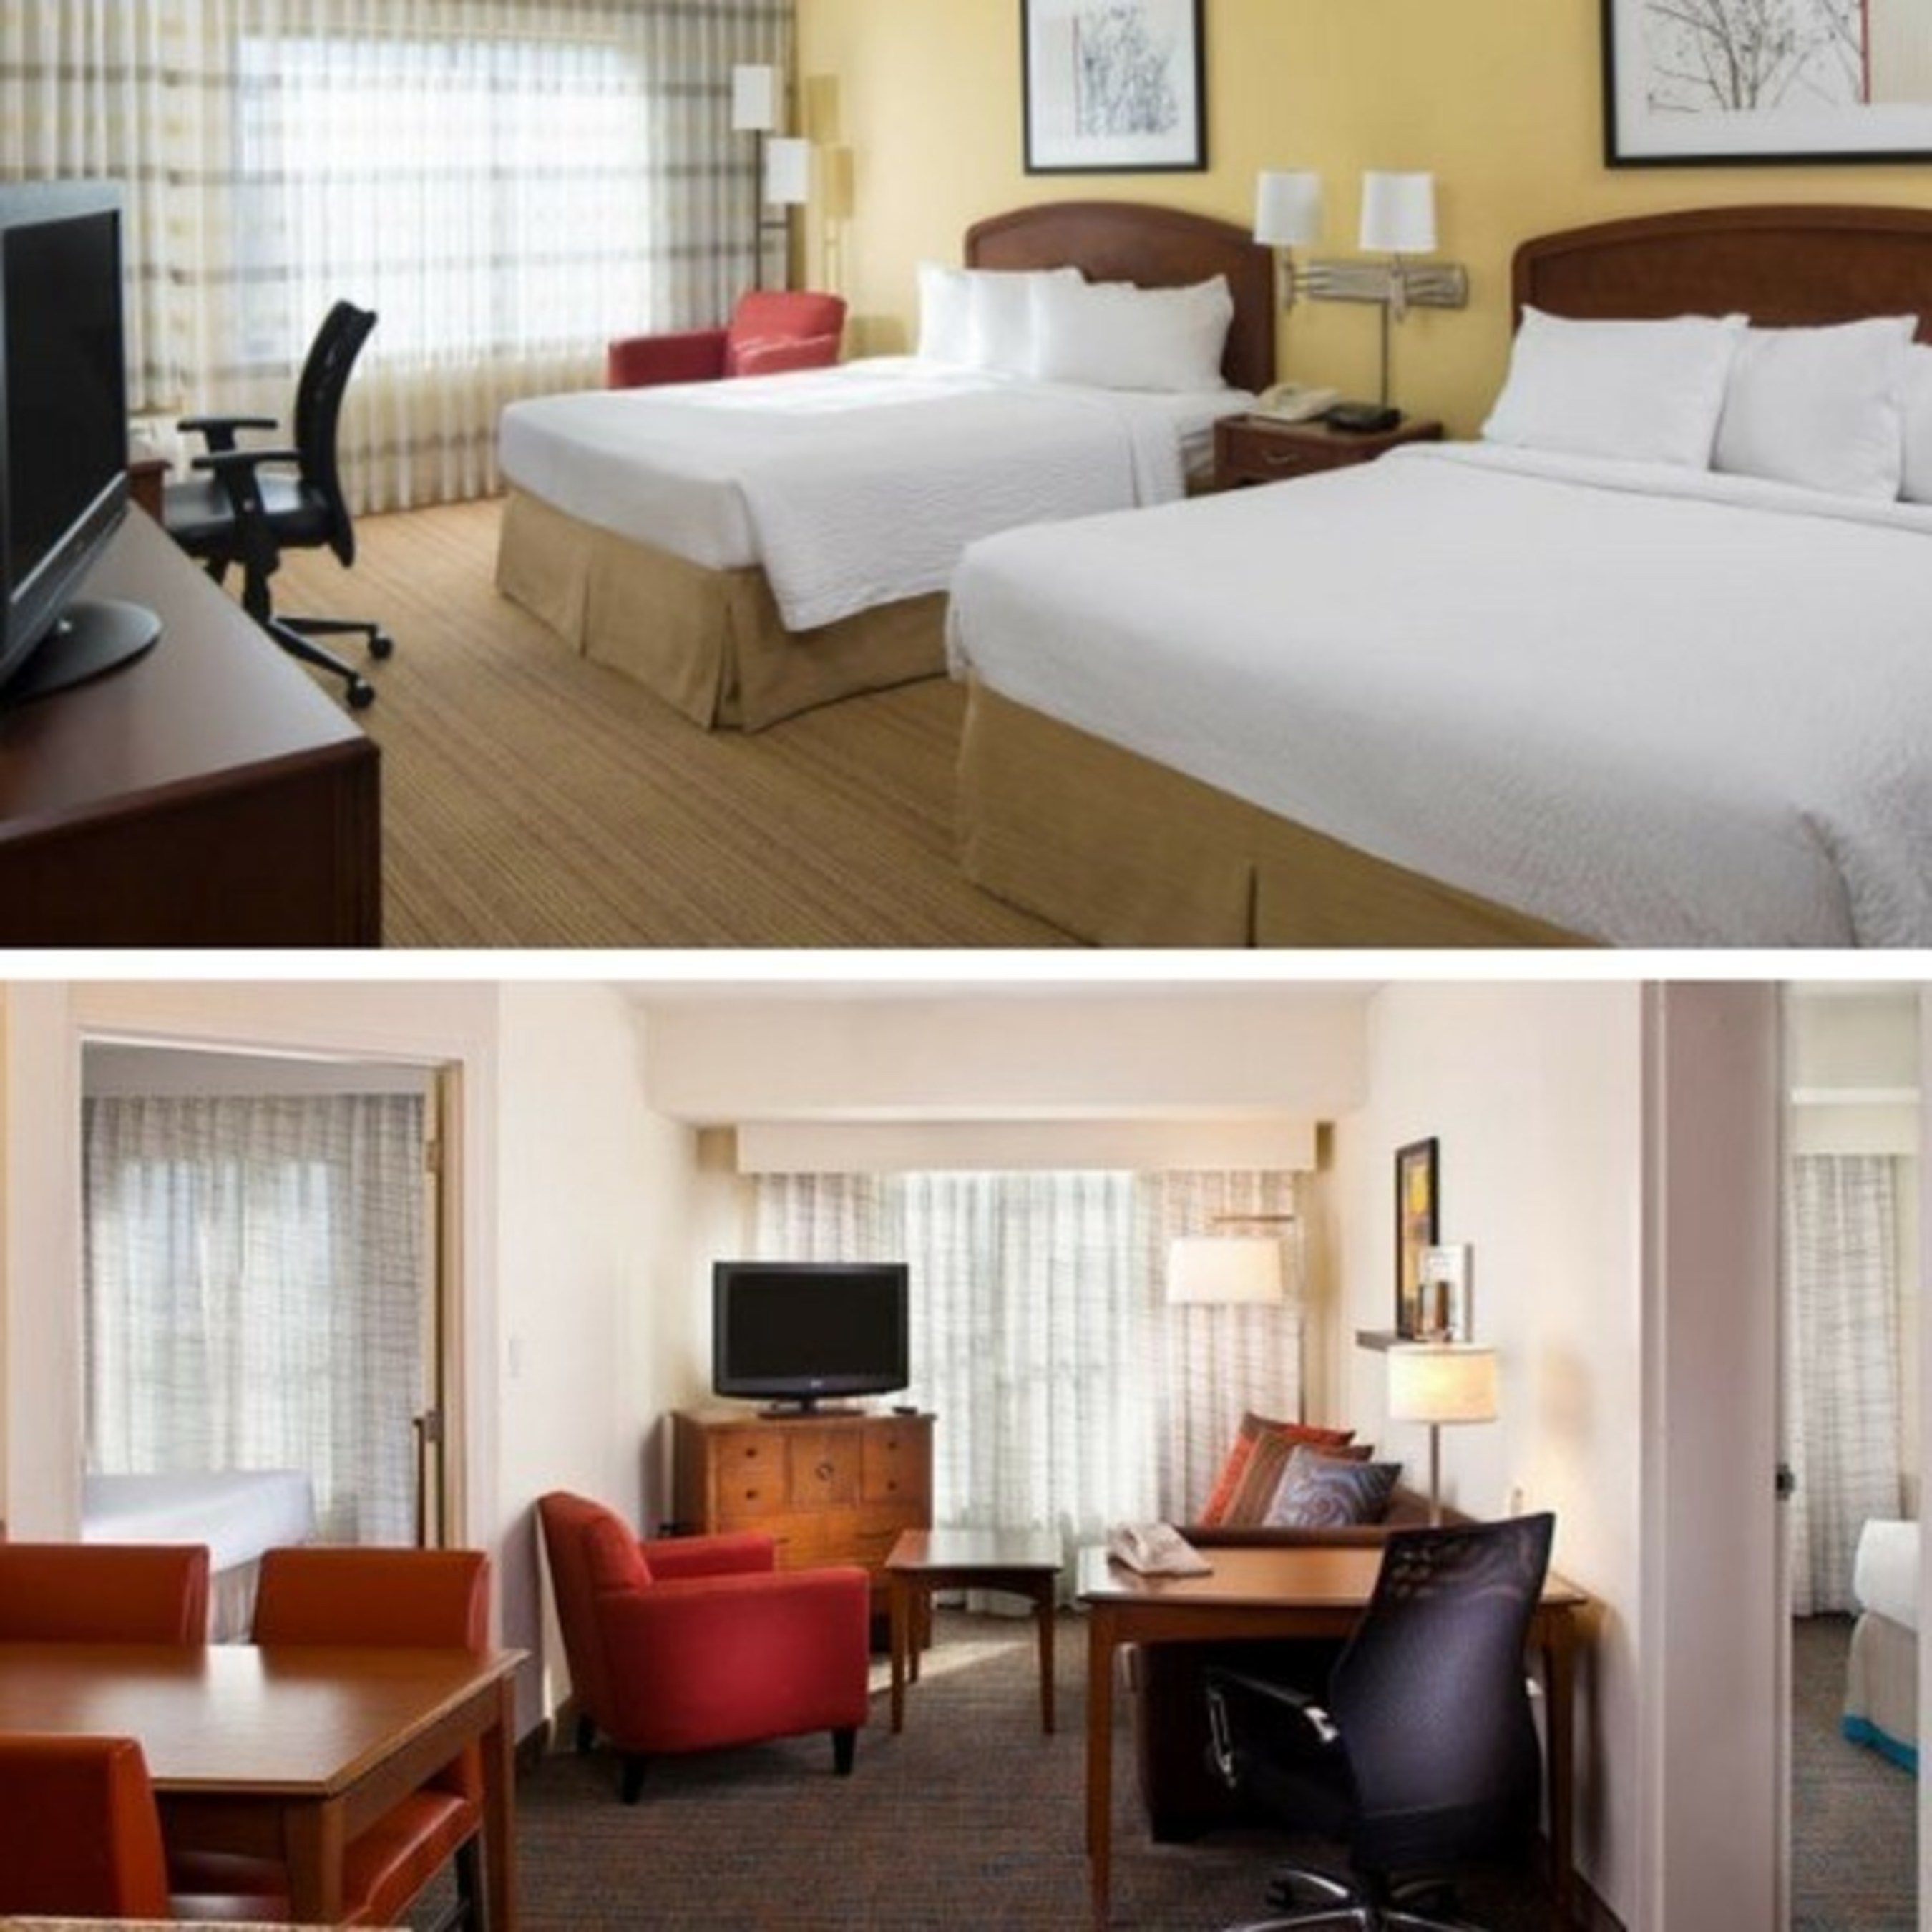 Two Daytona Beach hotels are encouraging Biketoberfest attendees to make reservations at Courtyard Daytona Beach Speedway/Airport and Residence Inn Daytona Beach Speedway/Airport during the annual event from Oct. 13-16, 2016. For information, visit DaytonaBeachCourtyard.com or DaytonaBeachResidenceInn.com.